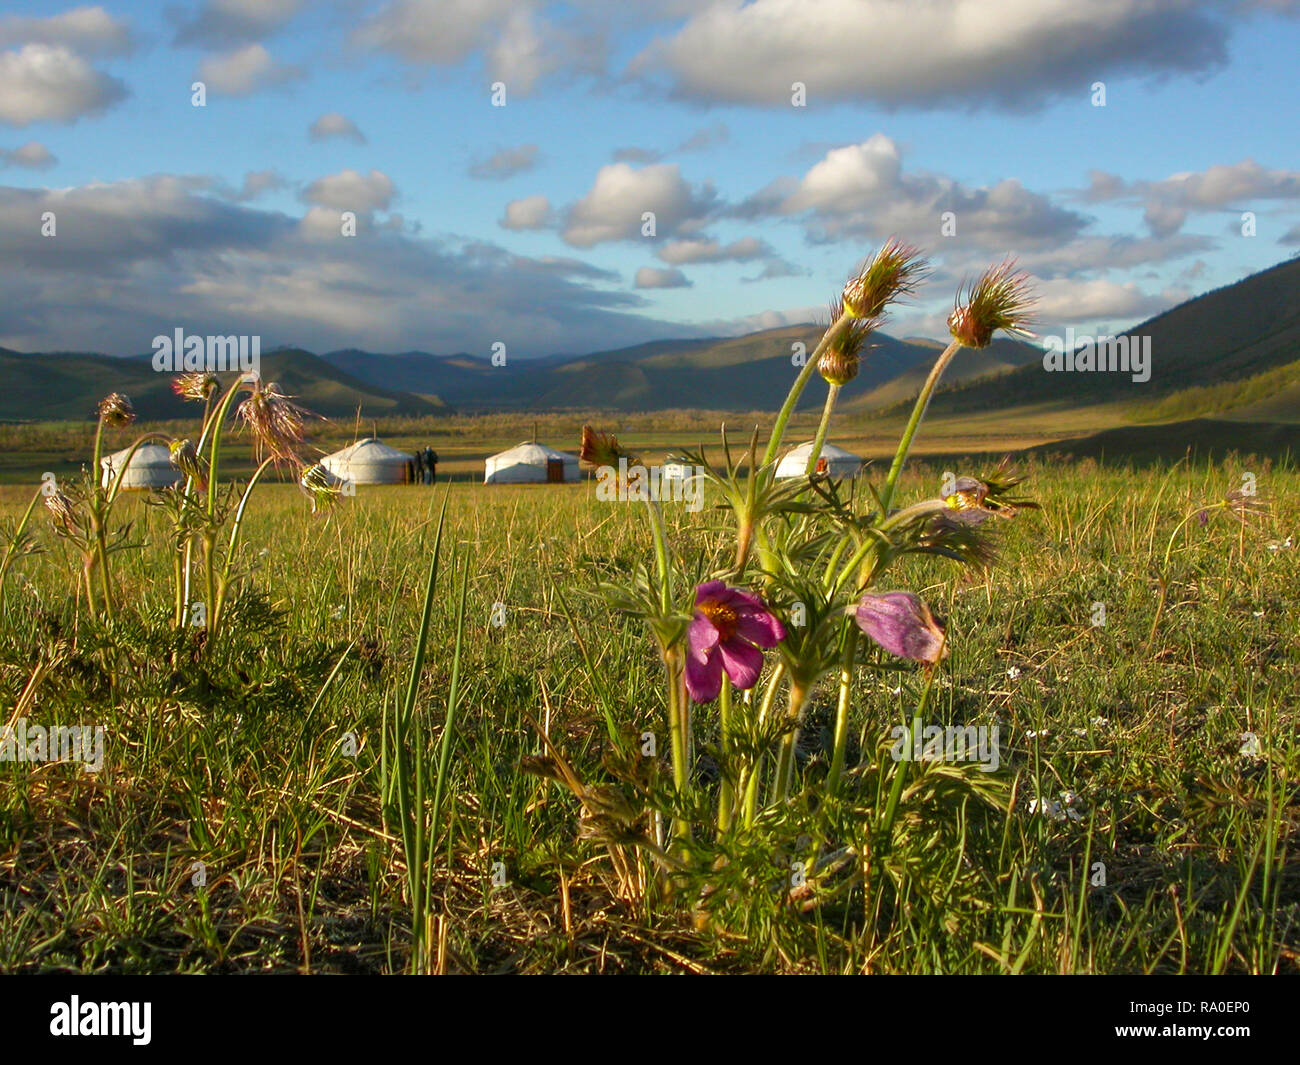 Camp of yurts in blooming Mongolian steppe with wildflowers, Tuul River Valley, Khan Khentii, Mongolia Stock Photo